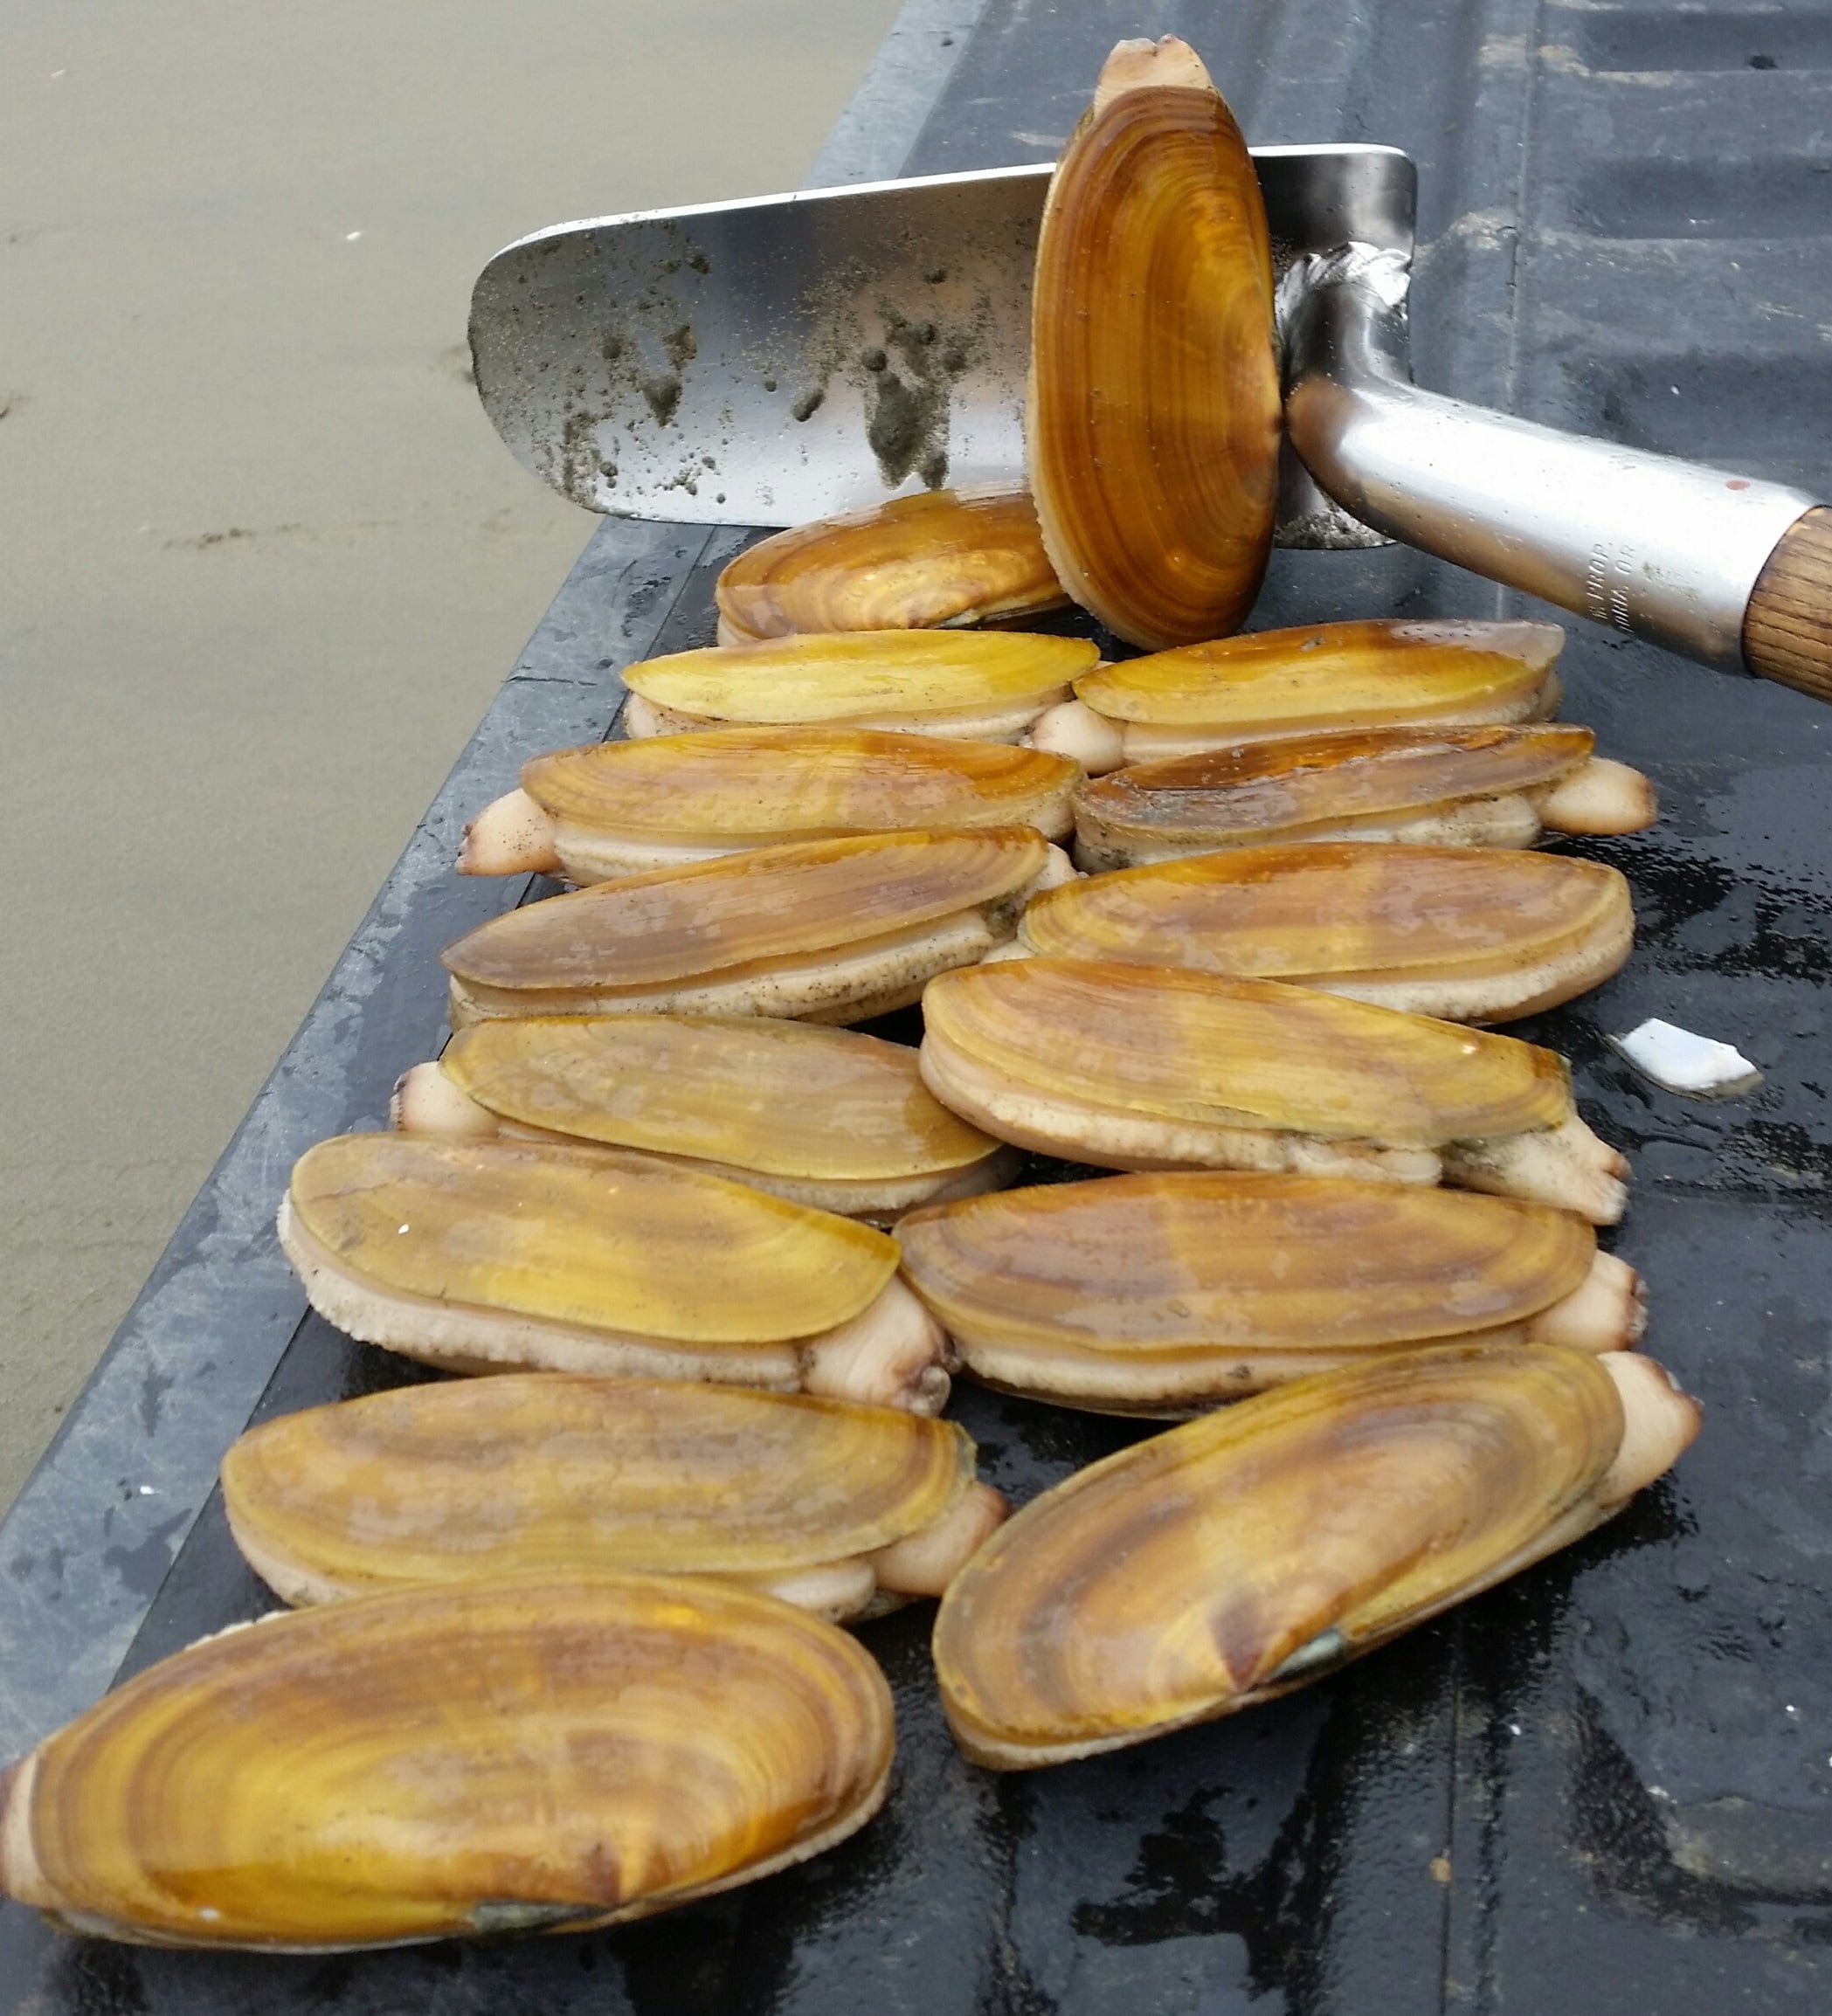 4 More Days Of Razor Clam Digging OKed For Mocrocks 